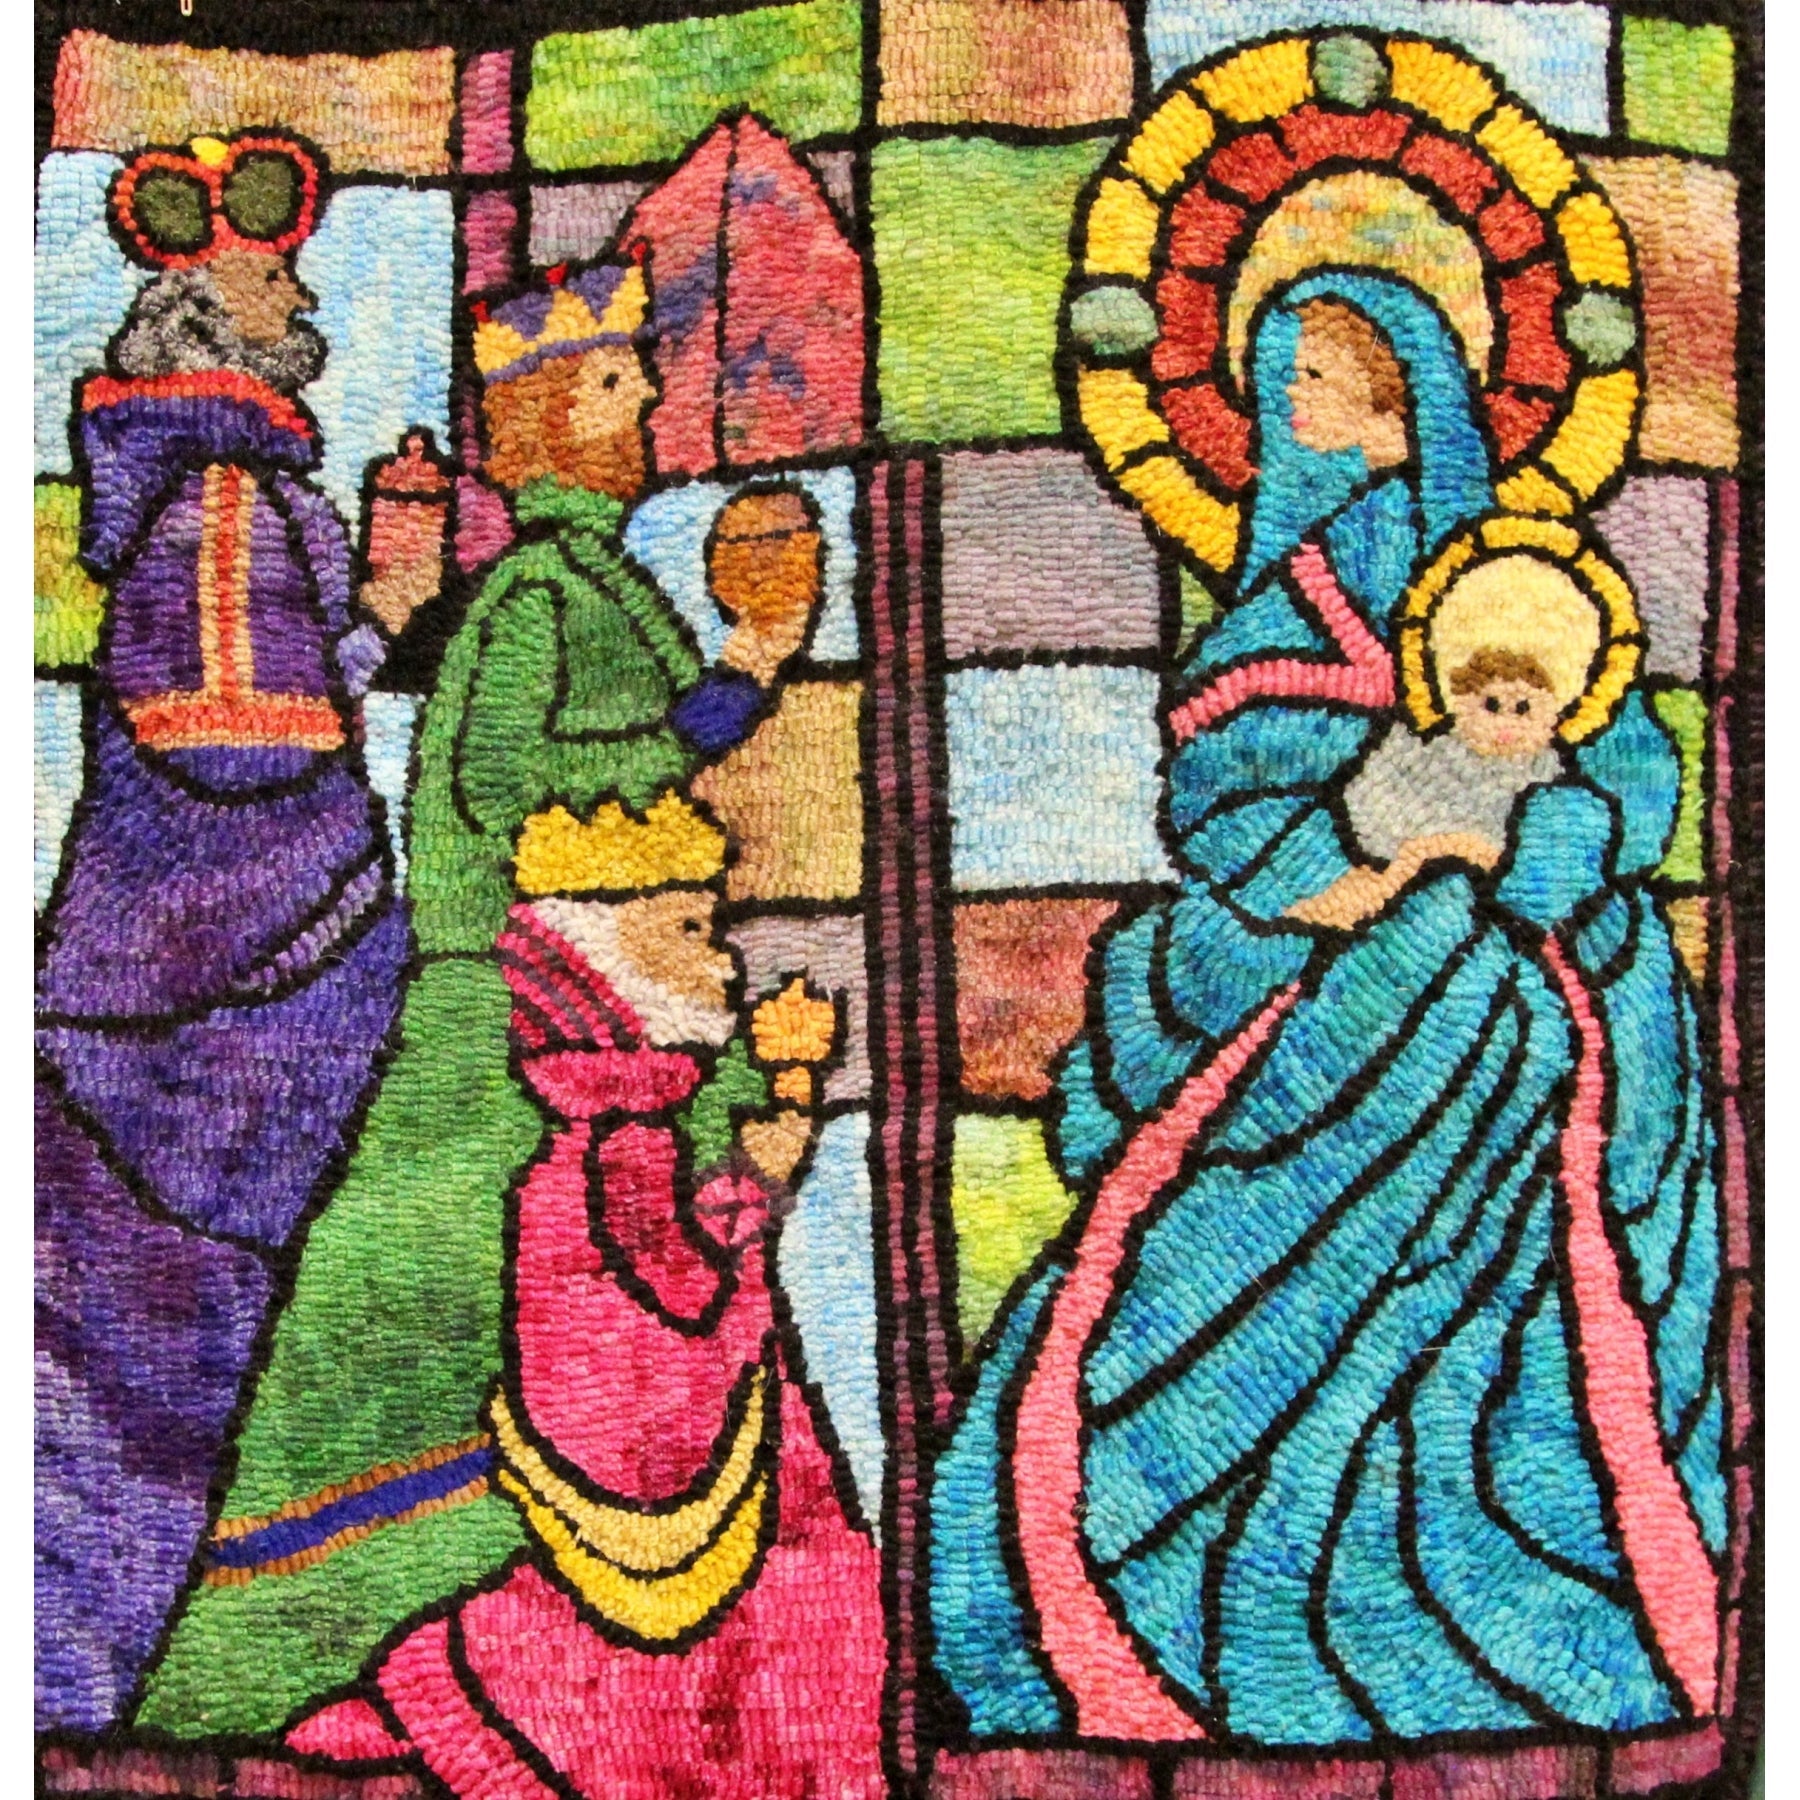 Stained Glass Nativity, rug hooked by Mary Osielski